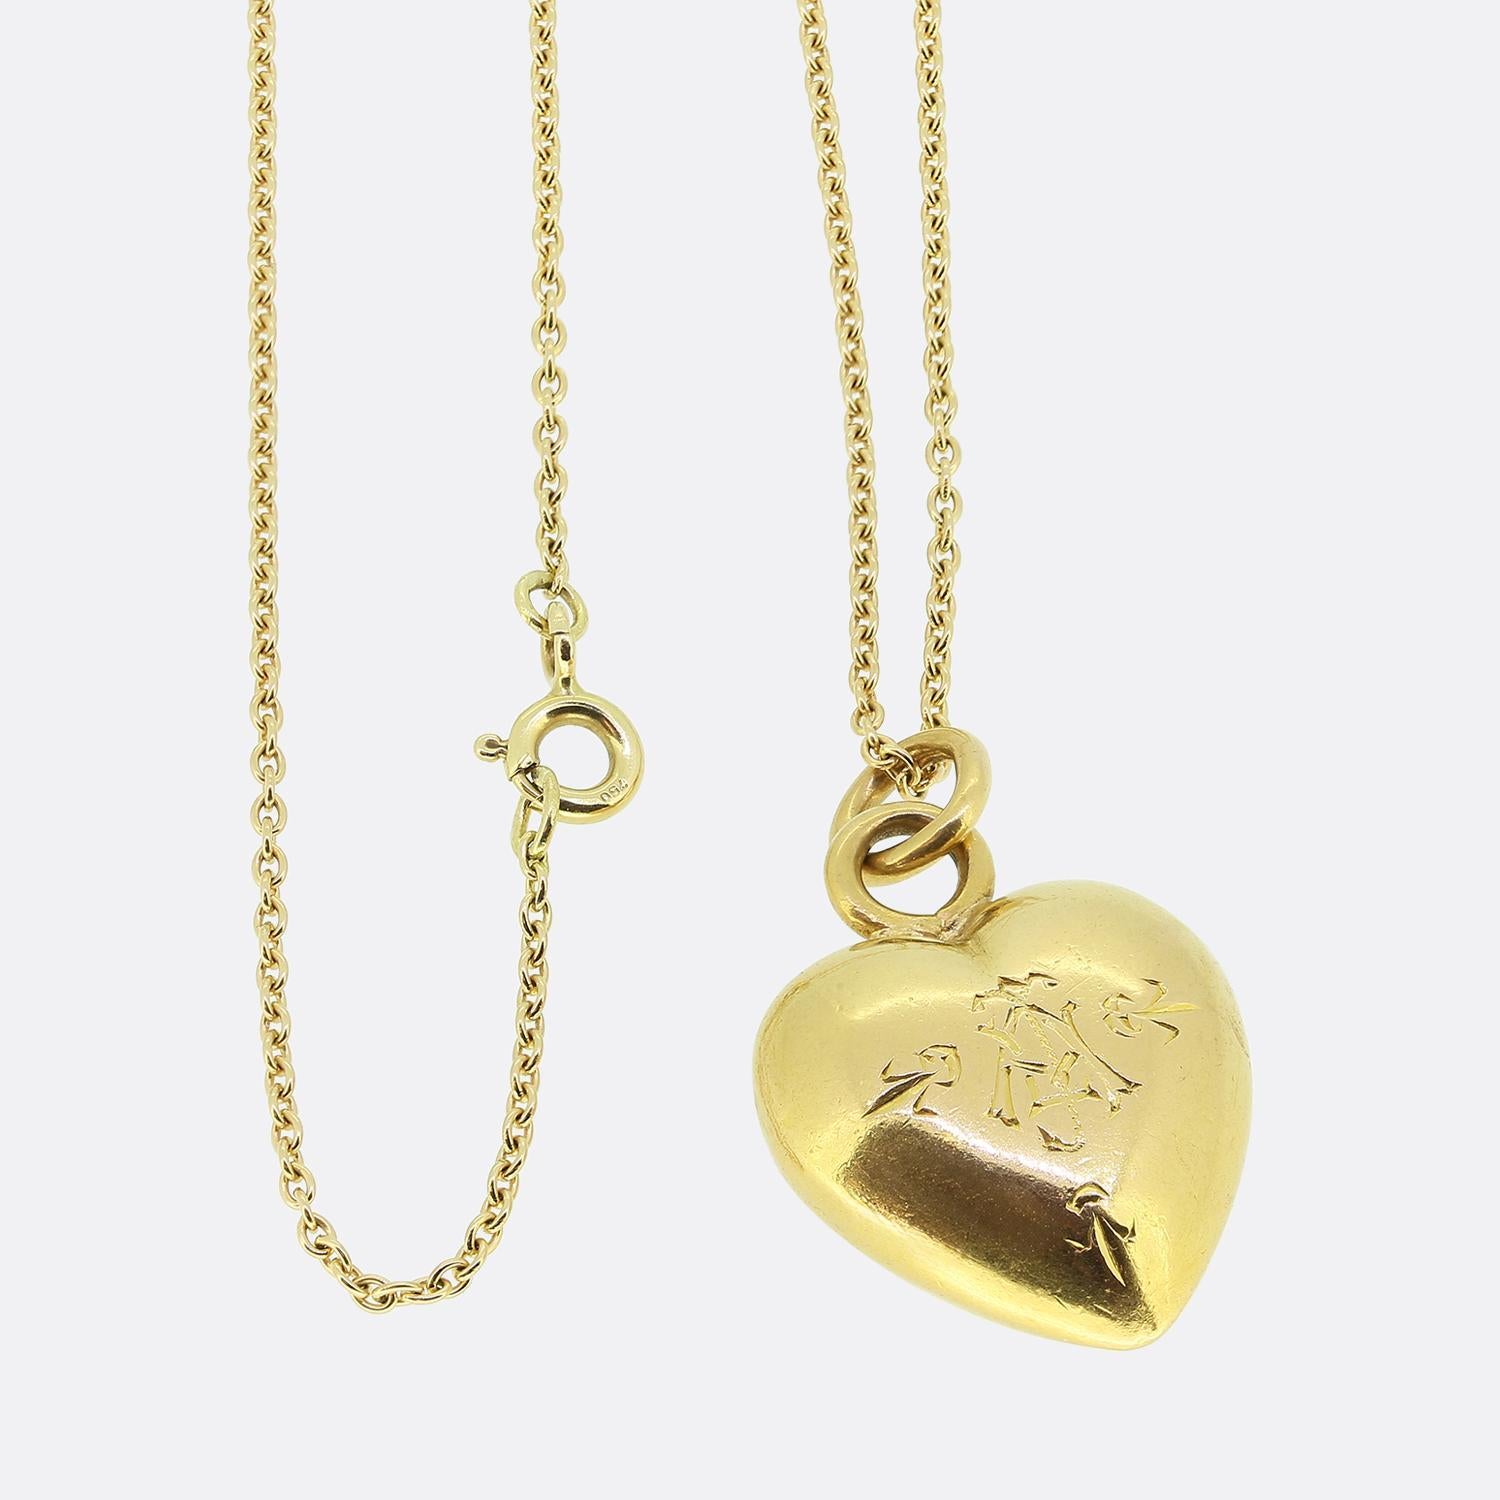 Here we have a beautiful ruby set pendant necklace. This antique pendant has been crafted from 18ct yellow gold into the the shape of a solid love heart and expertly set with a round faceted ruby possessing a rich vivid red colour